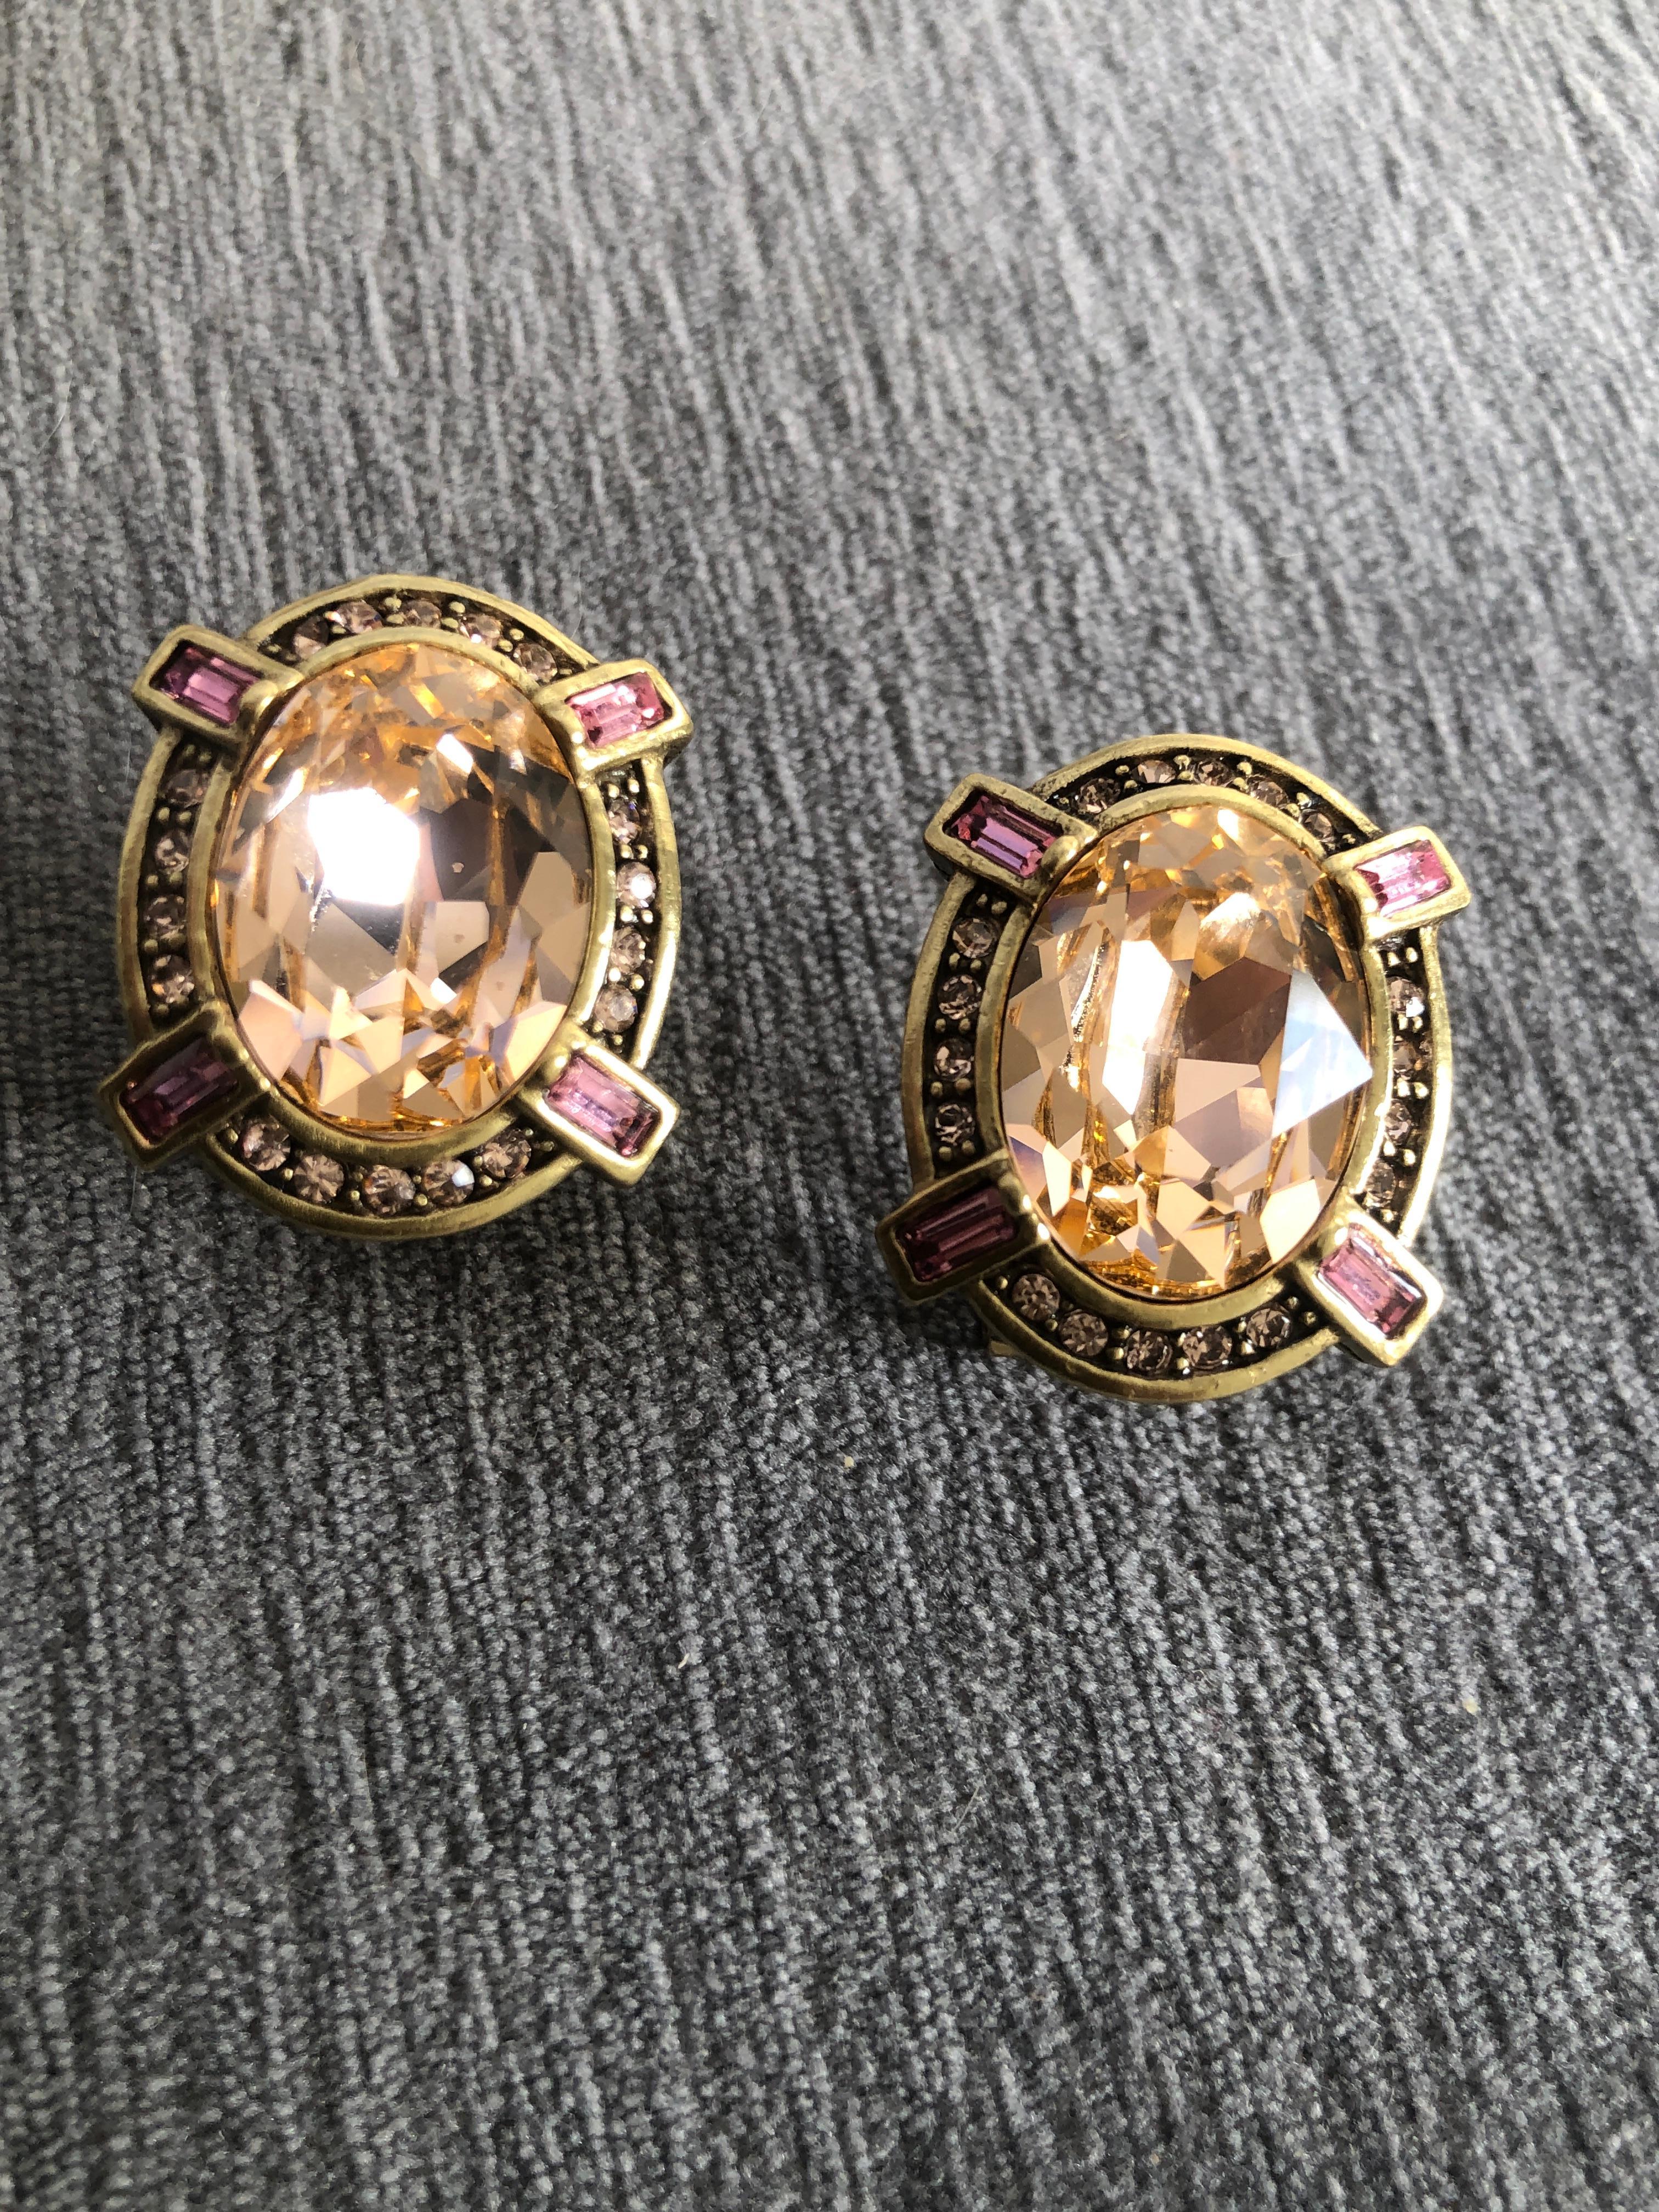 Just a gorgeous pair of glamorous designed by uber chic Heid Daus. A large blush color crystal oval surrounded by 4 pink crystal baguettes. On antique gold color metal. So Art Deco. this pair and 9 others listed today, all came from a very chic and